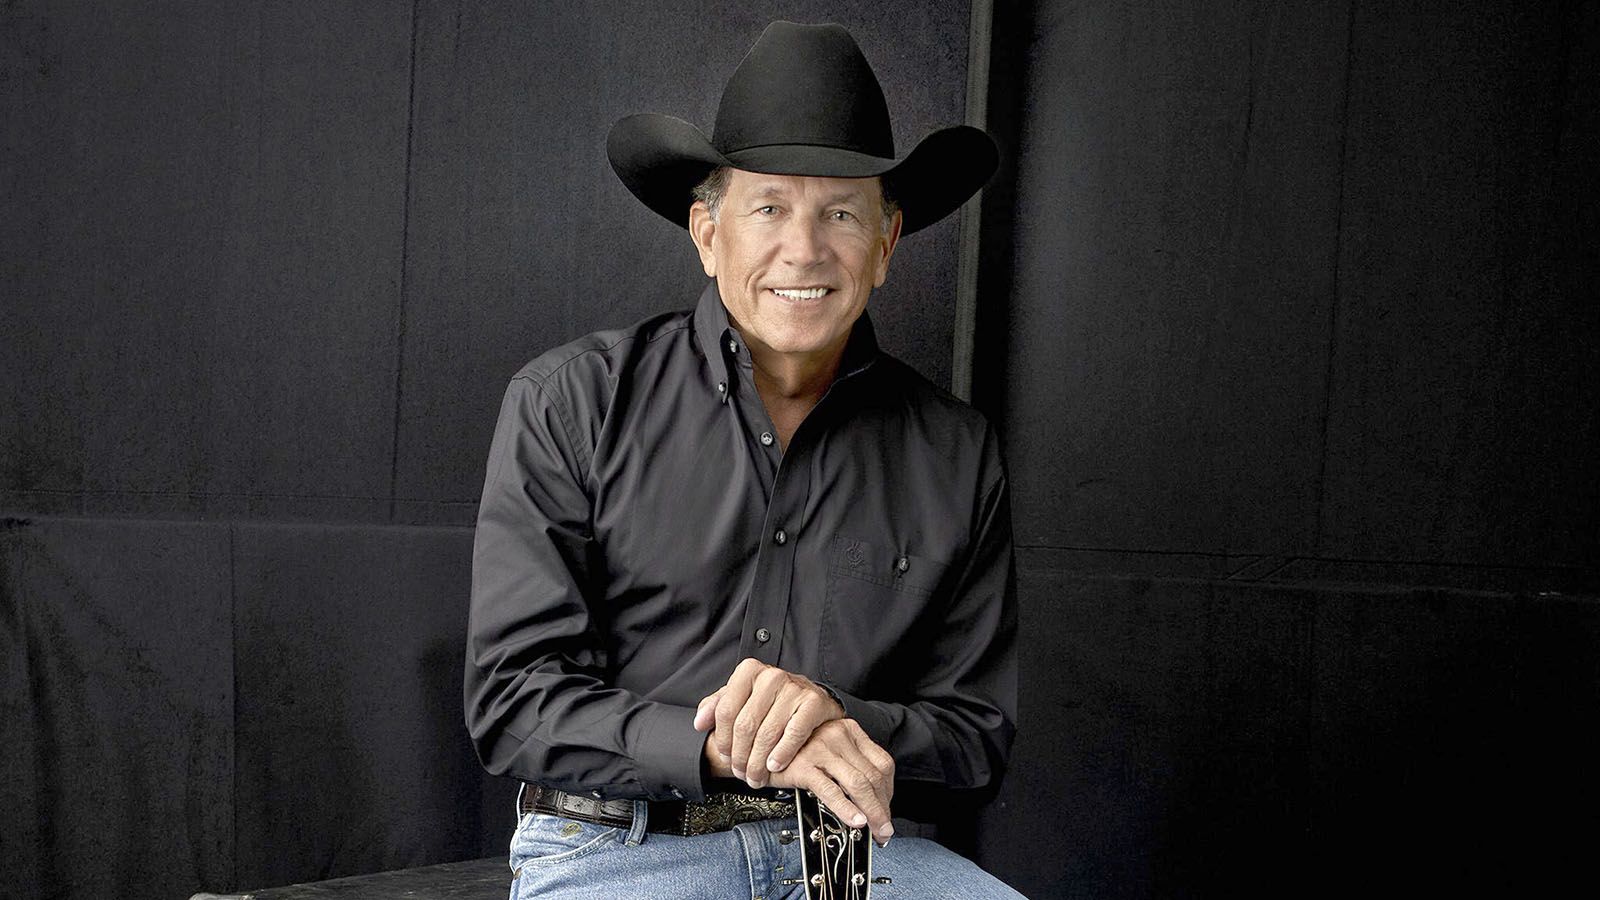 Iconic performer George Strait will be at this year's Buckeye Country Superfest.